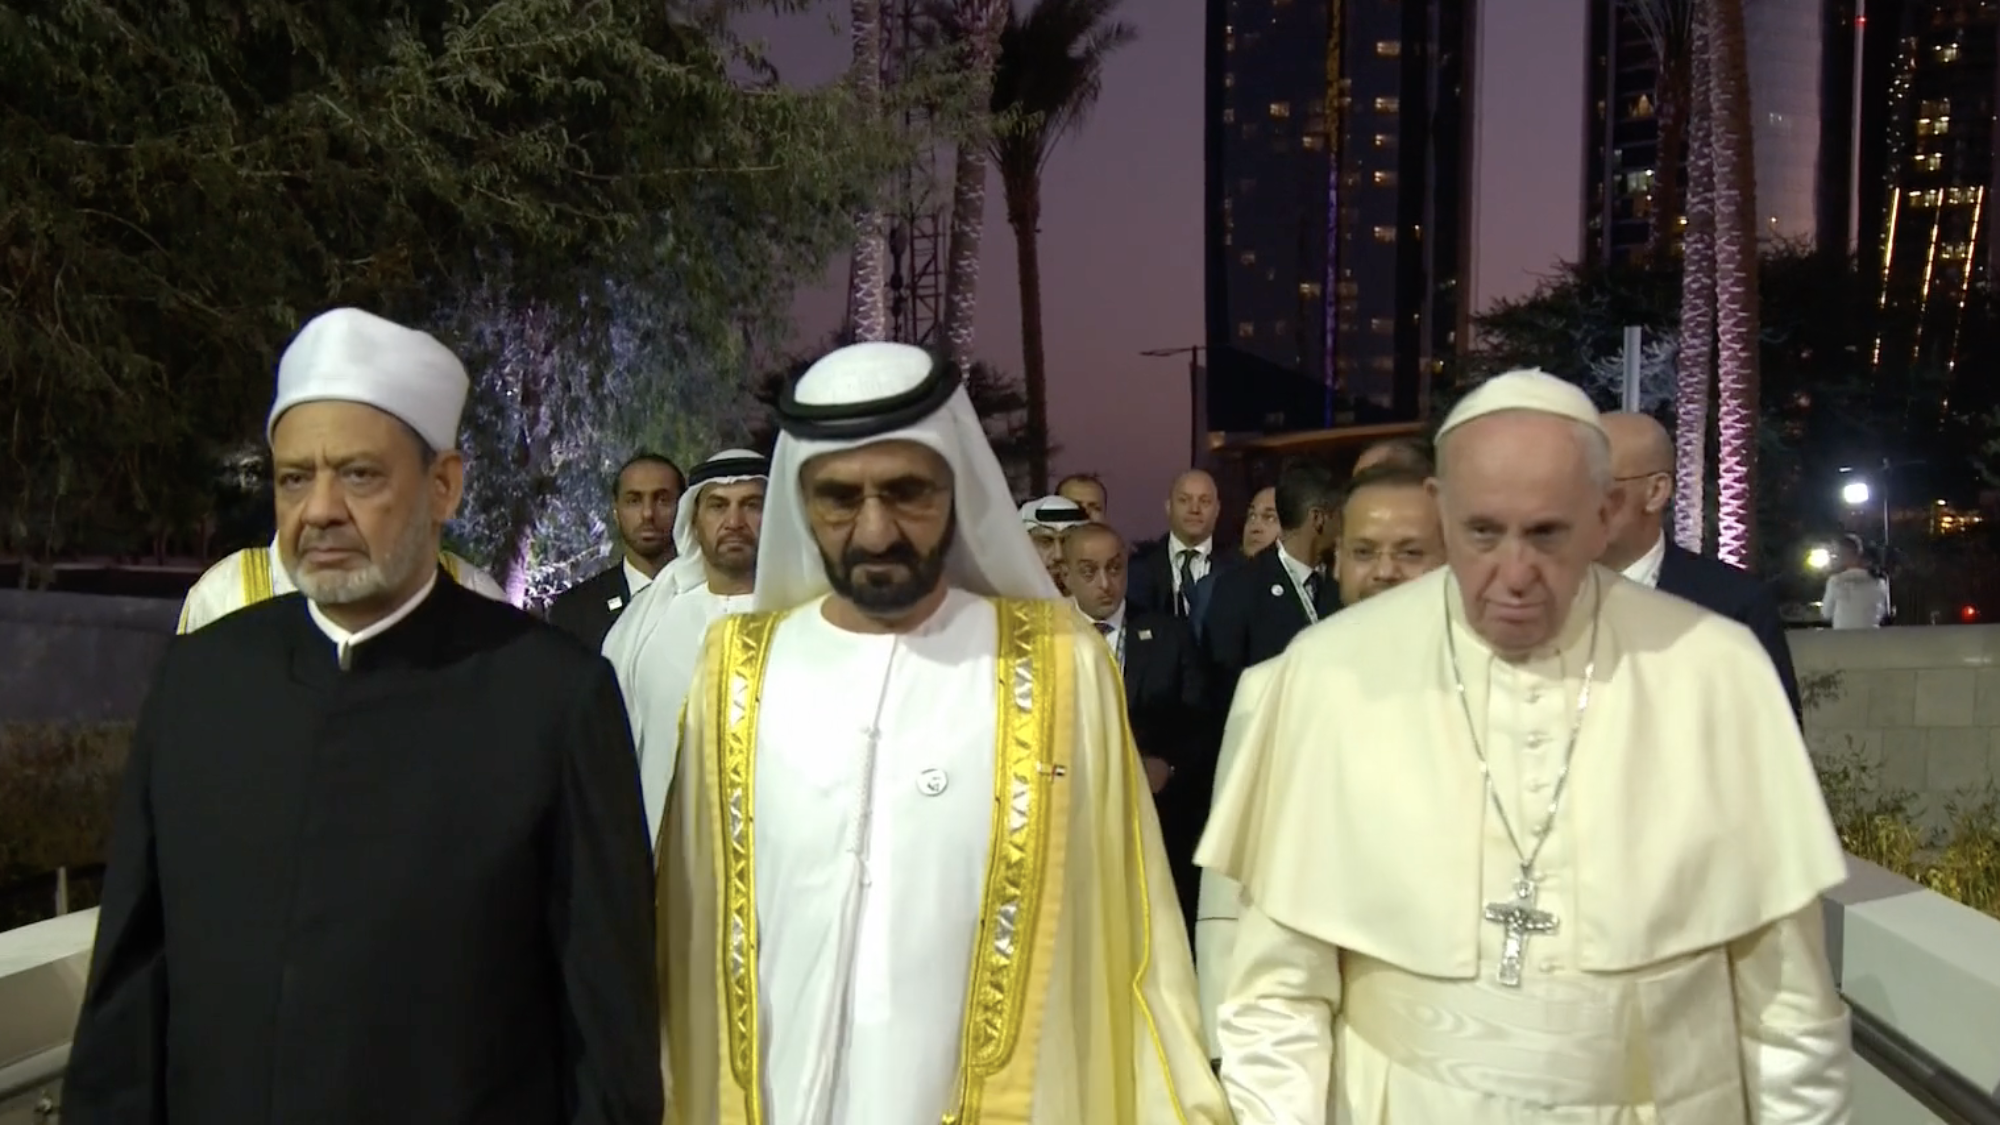 Sheikh Mohammed, Sheikh Ahmed el-Tayeb, and Pope Francis walk side-by-side in front of a crowd of people.